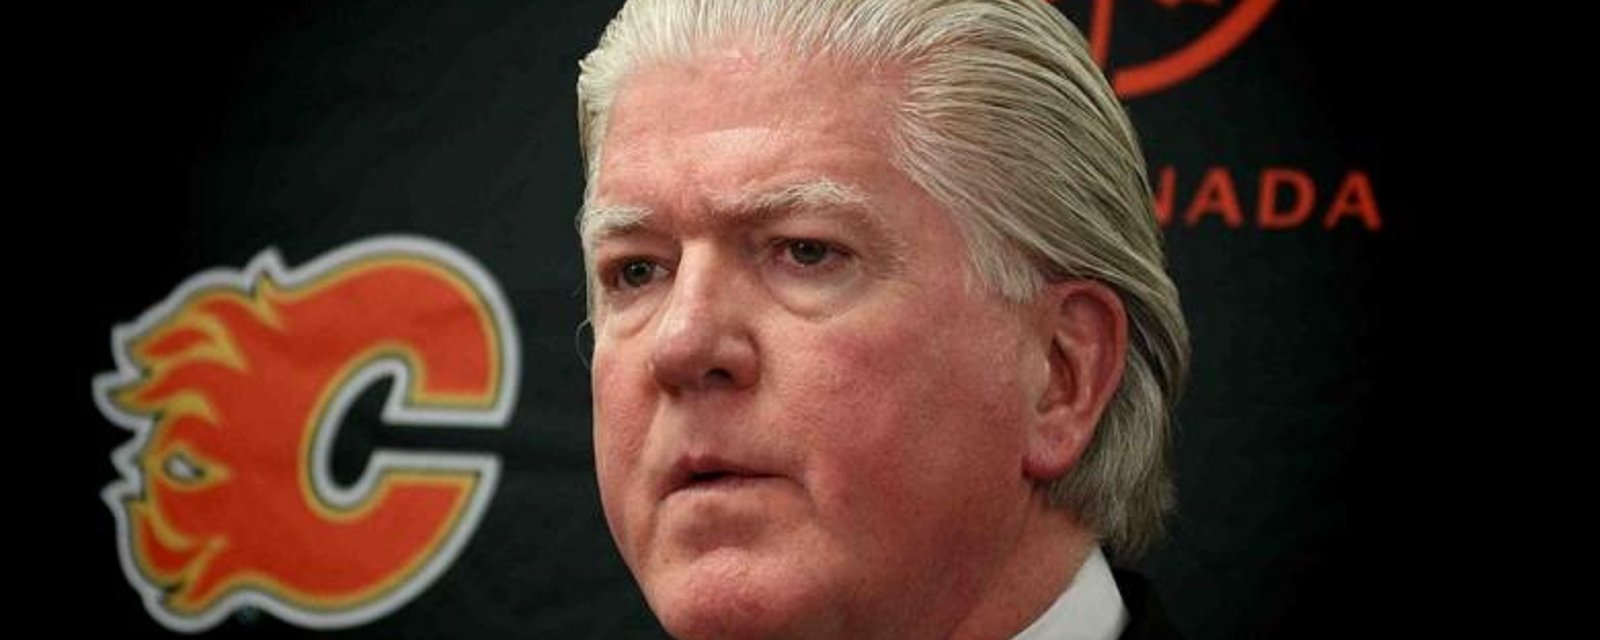 Flames President may not let his player participate in World Cup.